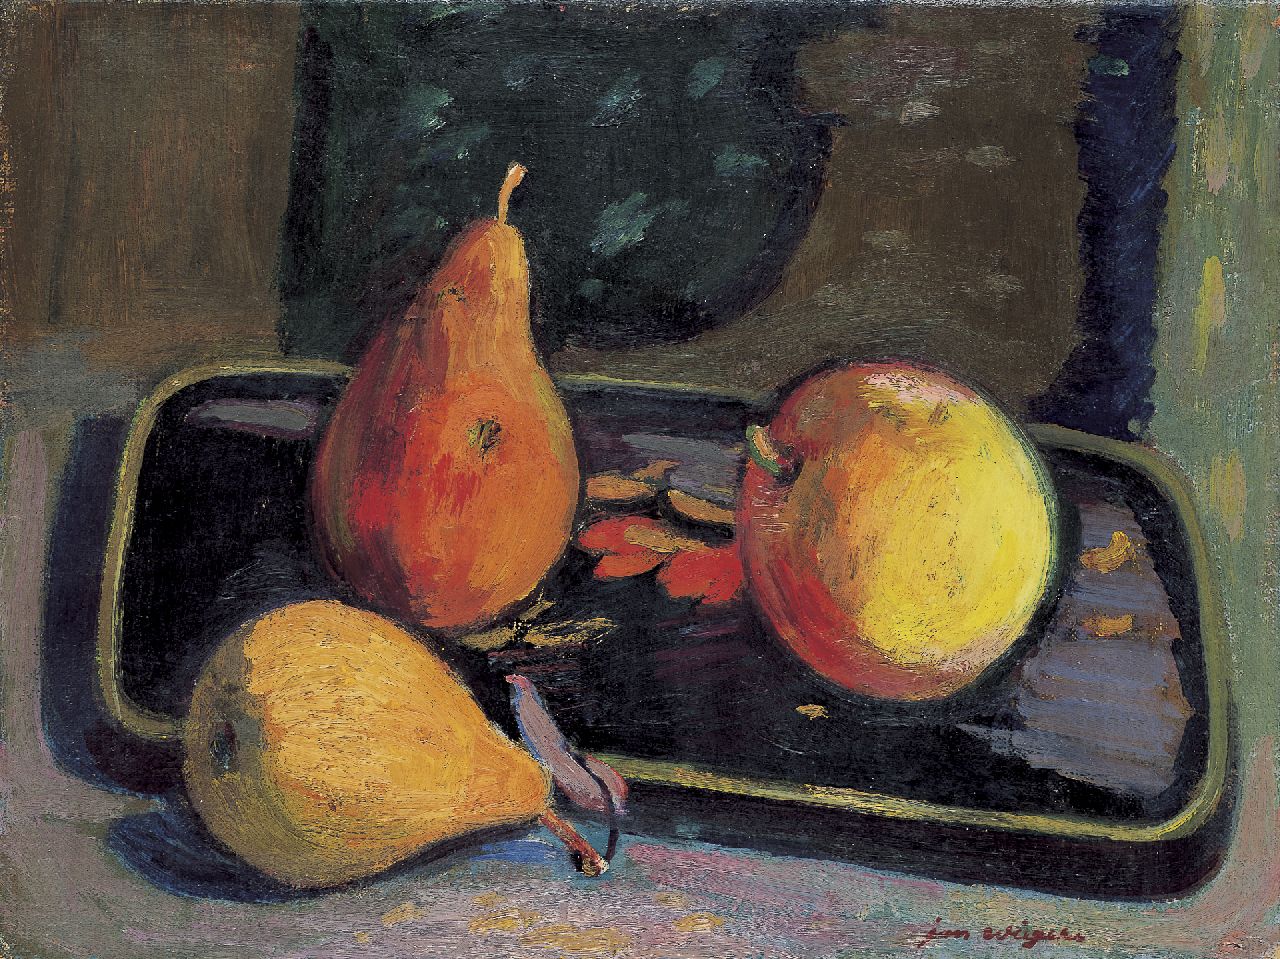 Wiegers J.  | Jan Wiegers, A still life with pears and a apple, Öl auf Leinwand 30,2 x 40,0 cm, signed l.r.